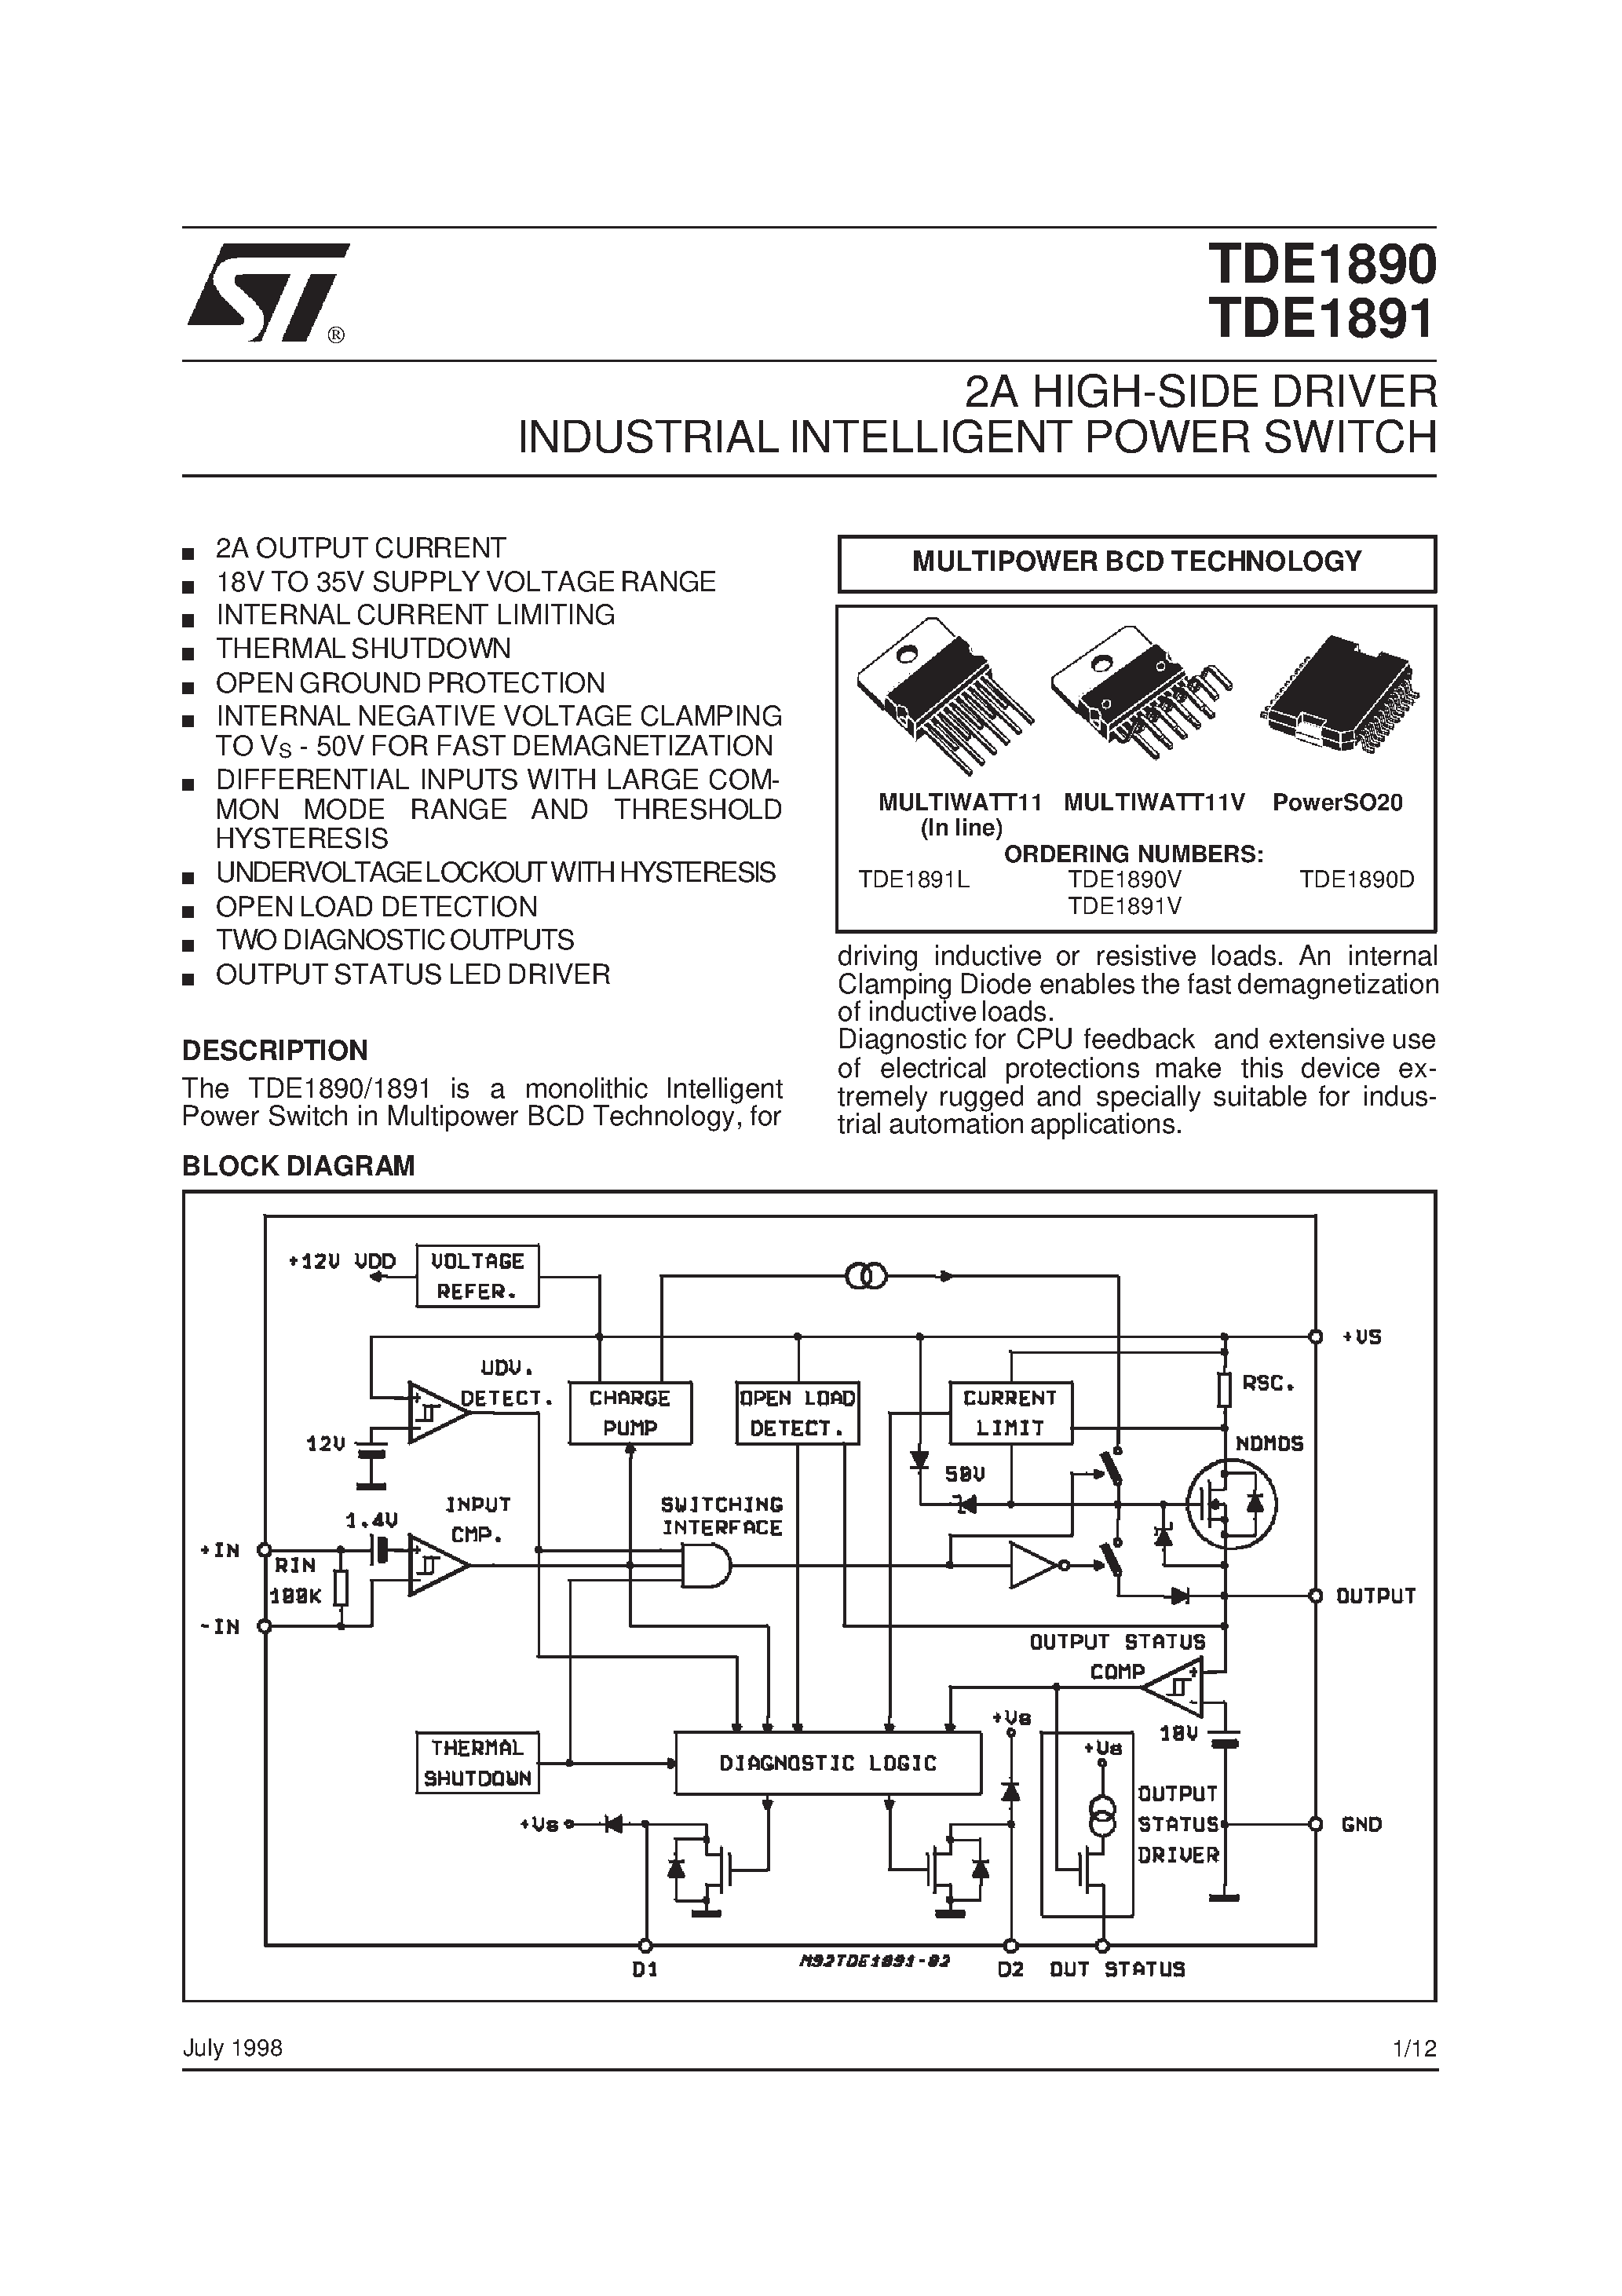 Даташит TDE1891 - 2A HIGH-SIDE DRIVER INDUSTRIAL INTELLIGENT POWER SWITCH страница 1